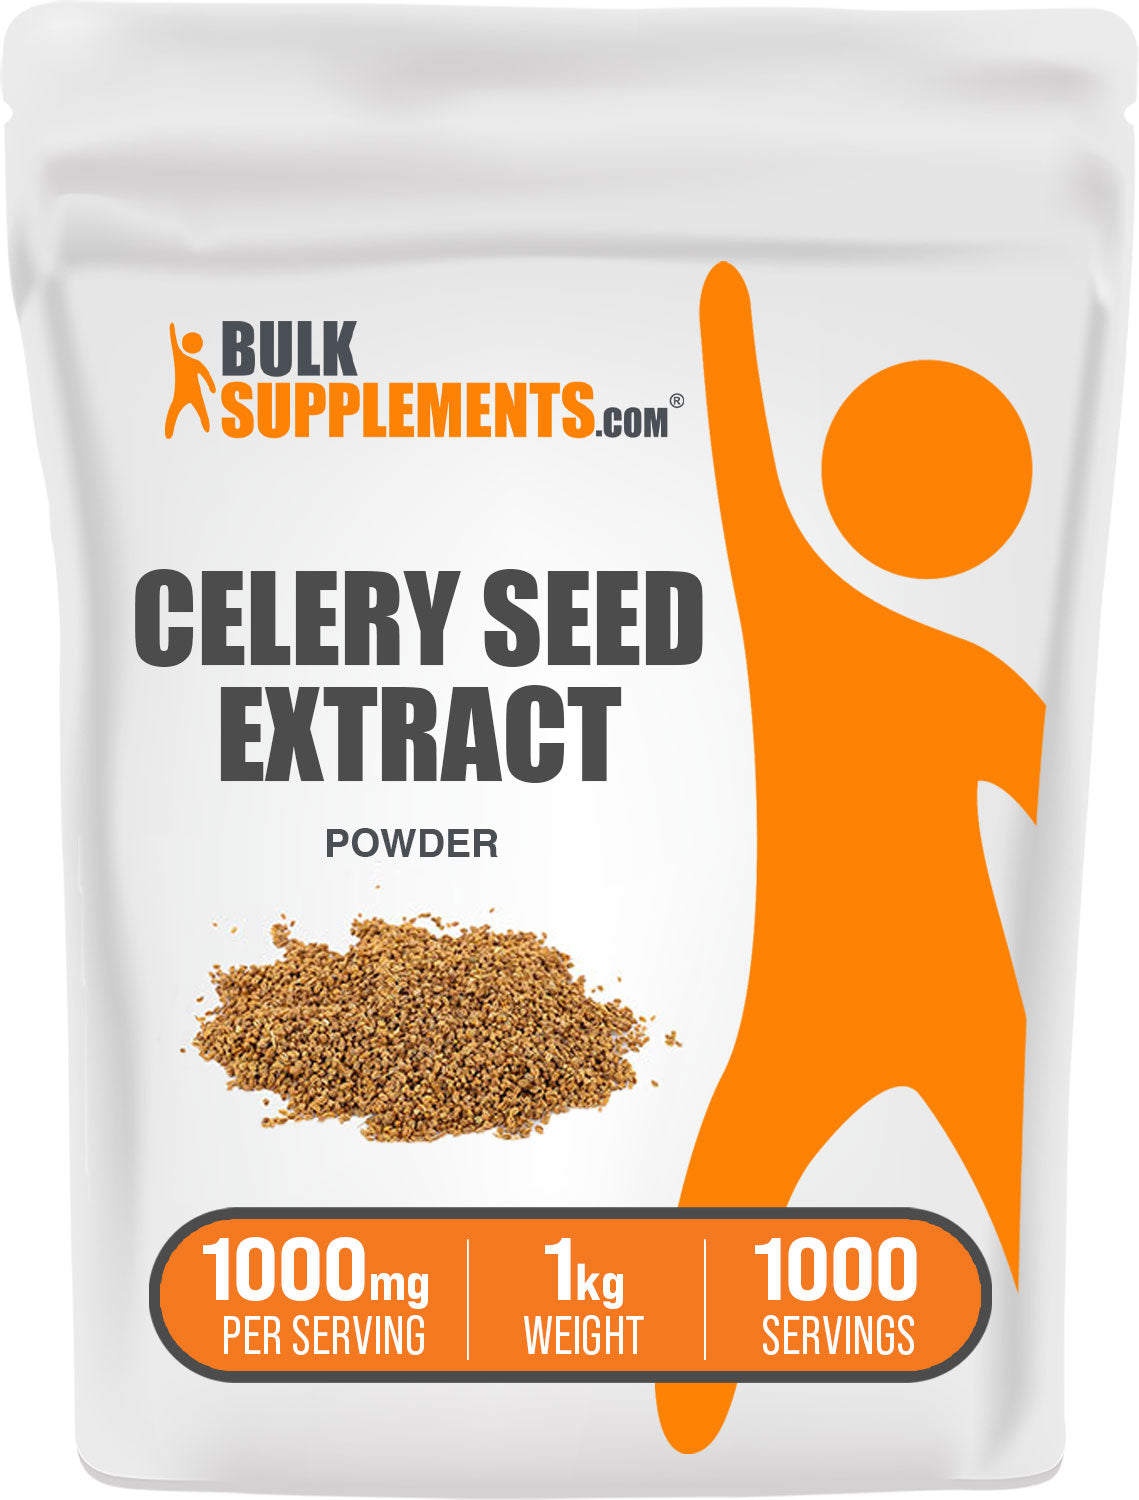 1kg celery seed extract